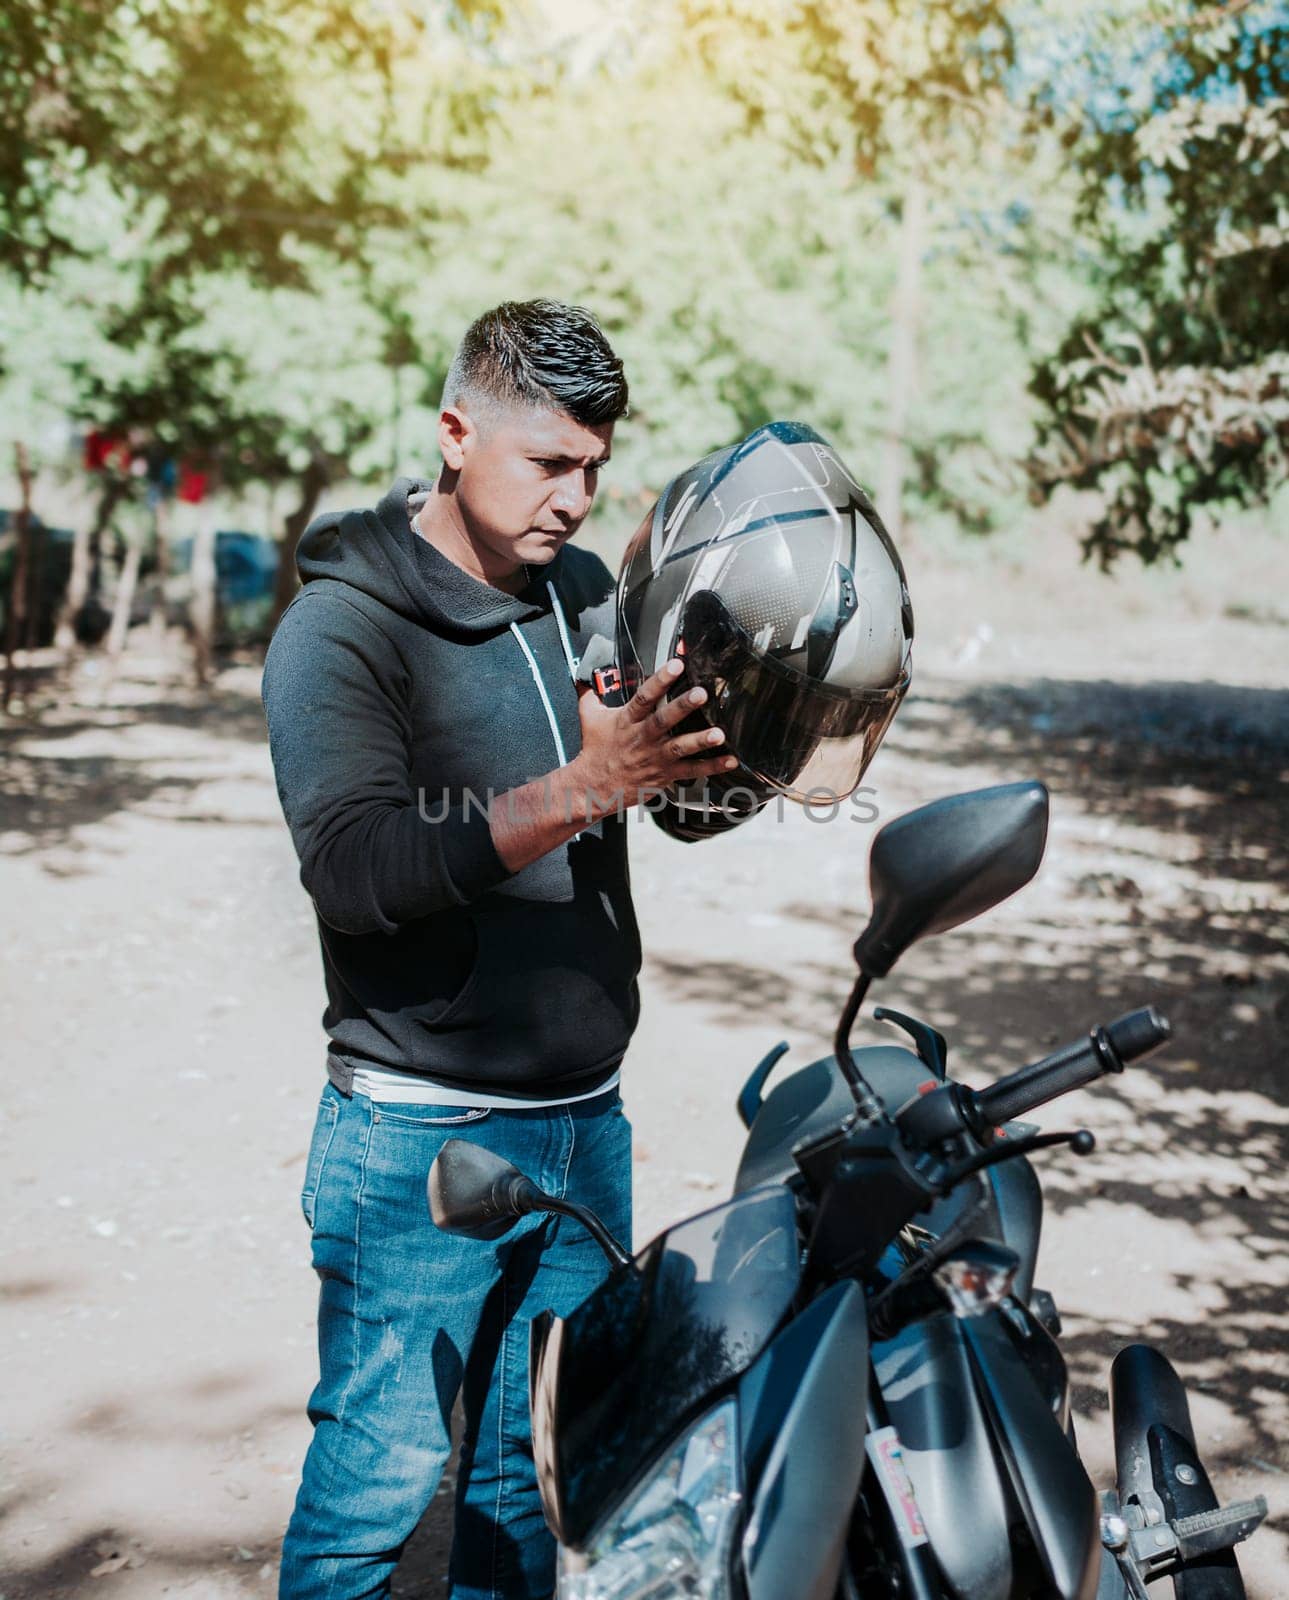 Man on motorcycle putting on helmet. Person on motorcycle putting on safety helmet. Biker motorcycle safety concept. Young motorcyclist man putting on safety helmet by isaiphoto